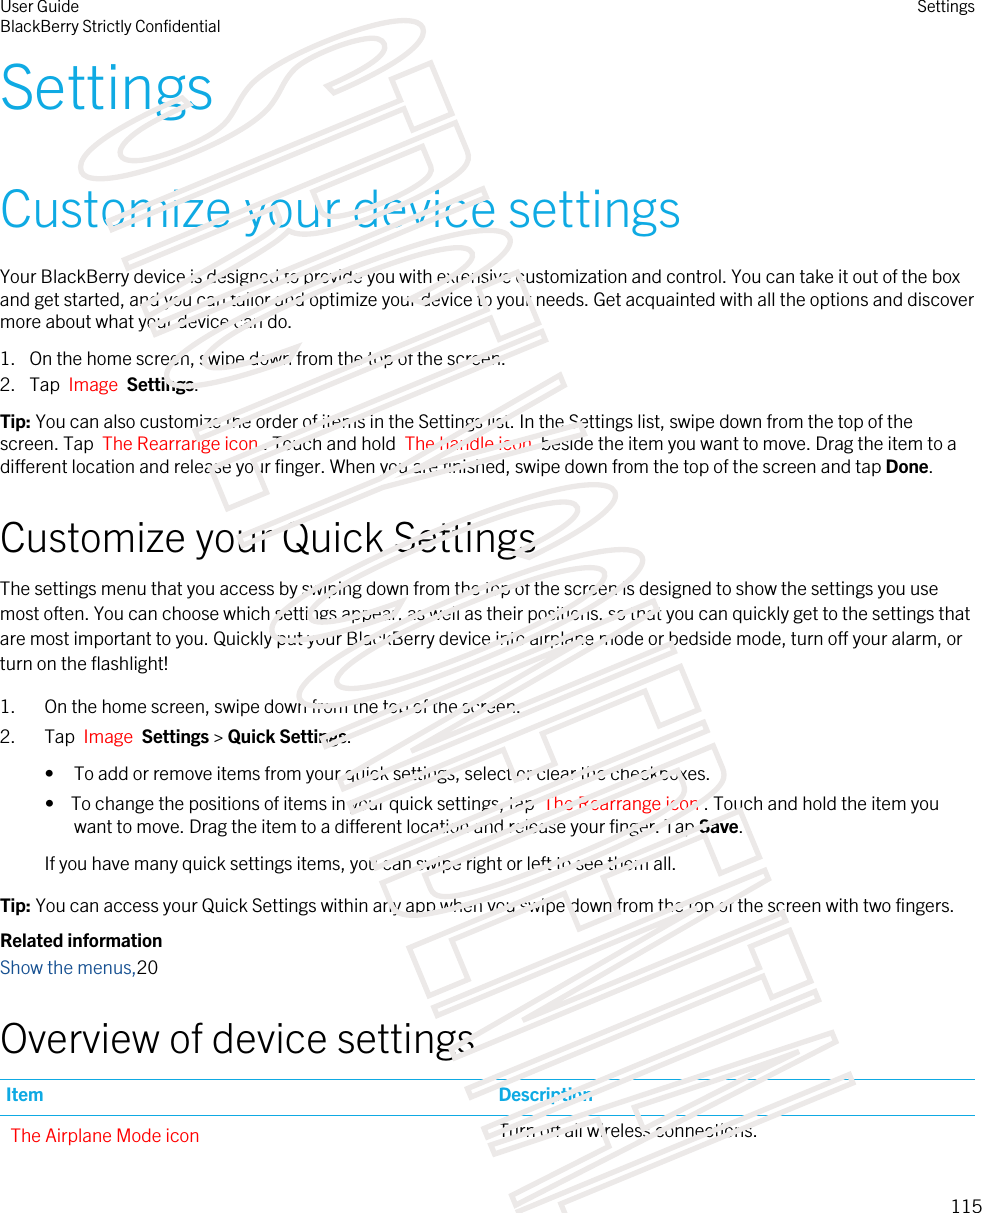 SettingsCustomize your device settingsYour BlackBerry device is designed to provide you with extensive customization and control. You can take it out of the box and get started, and you can tailor and optimize your device to your needs. Get acquainted with all the options and discover more about what your device can do.1. On the home screen, swipe down from the top of the screen.2. Tap  Image  Settings.Tip: You can also customize the order of items in the Settings list. In the Settings list, swipe down from the top of the screen. Tap  The Rearrange icon . Touch and hold  The handle icon  beside the item you want to move. Drag the item to a different location and release your finger. When you are finished, swipe down from the top of the screen and tap Done.Customize your Quick SettingsThe settings menu that you access by swiping down from the top of the screen is designed to show the settings you use most often. You can choose which settings appear, as well as their positions, so that you can quickly get to the settings that are most important to you. Quickly put your BlackBerry device into airplane mode or bedside mode, turn off your alarm, or turn on the flashlight!1. On the home screen, swipe down from the top of the screen.2. Tap  Image  Settings &gt; Quick Settings.• To add or remove items from your quick settings, select or clear the checkboxes.•  To change the positions of items in your quick settings, tap  The Rearrange icon . Touch and hold the item you want to move. Drag the item to a different location and release your finger. Tap Save.If you have many quick settings items, you can swipe right or left to see them all.Tip: You can access your Quick Settings within any app when you swipe down from the top of the screen with two fingers.Related informationShow the menus,20Overview of device settingsItem DescriptionThe Airplane Mode icon Turn off all wireless connections.User GuideBlackBerry Strictly ConfidentialSettings115STRICTLY CONFIDENTIAL